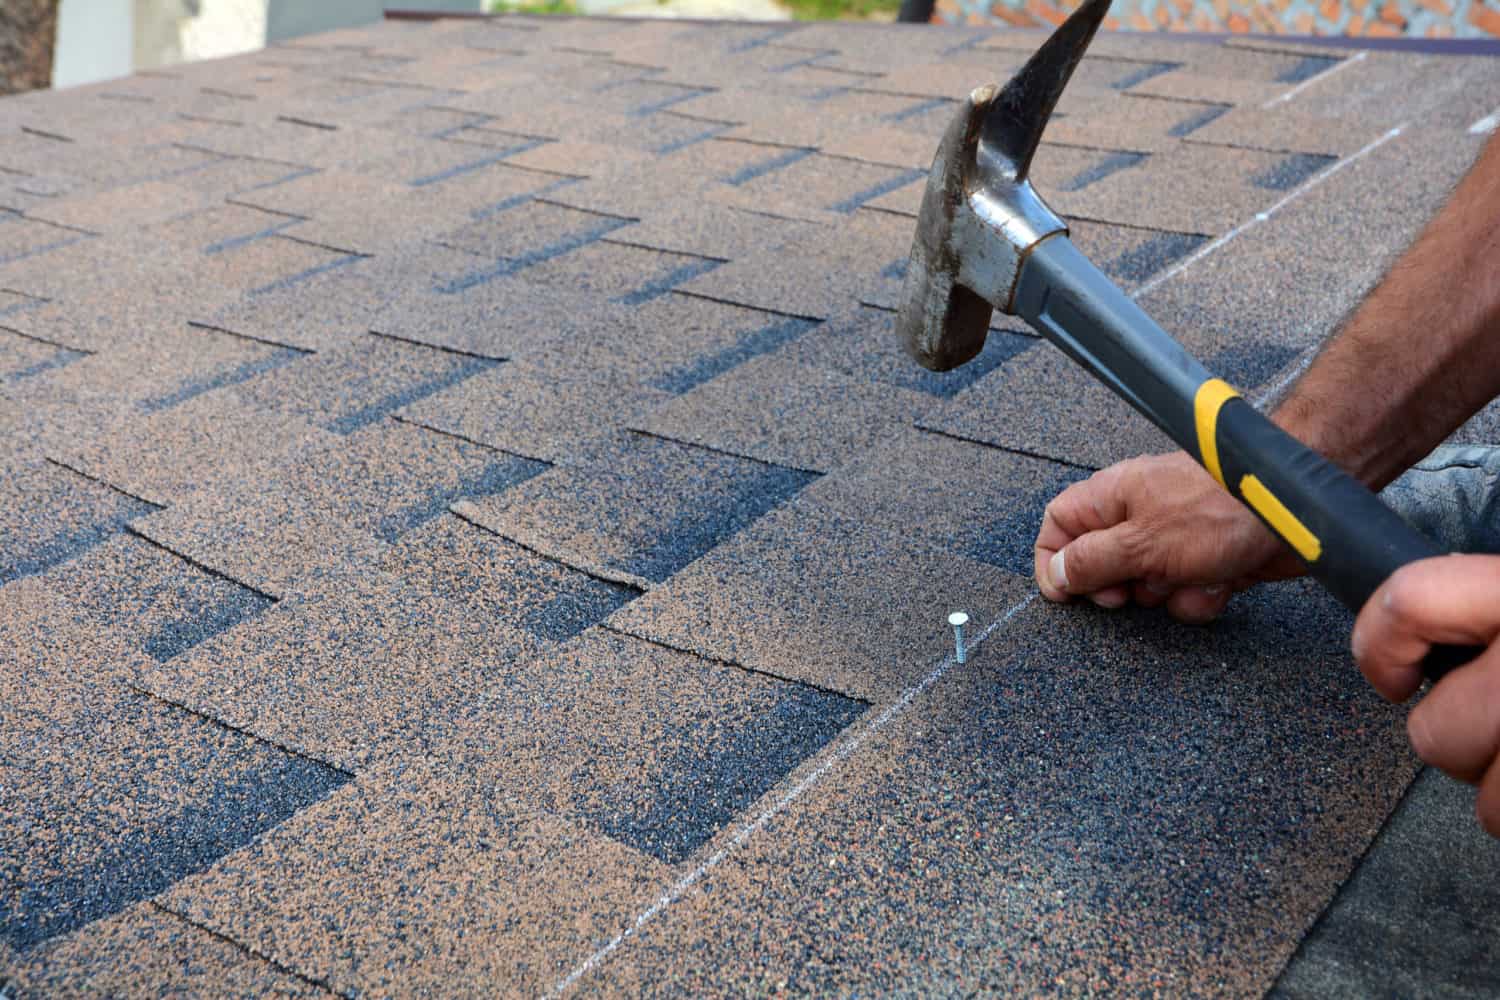 Worker hands installing bitumen roof shingles. Completing a full, not a partial roof replacement